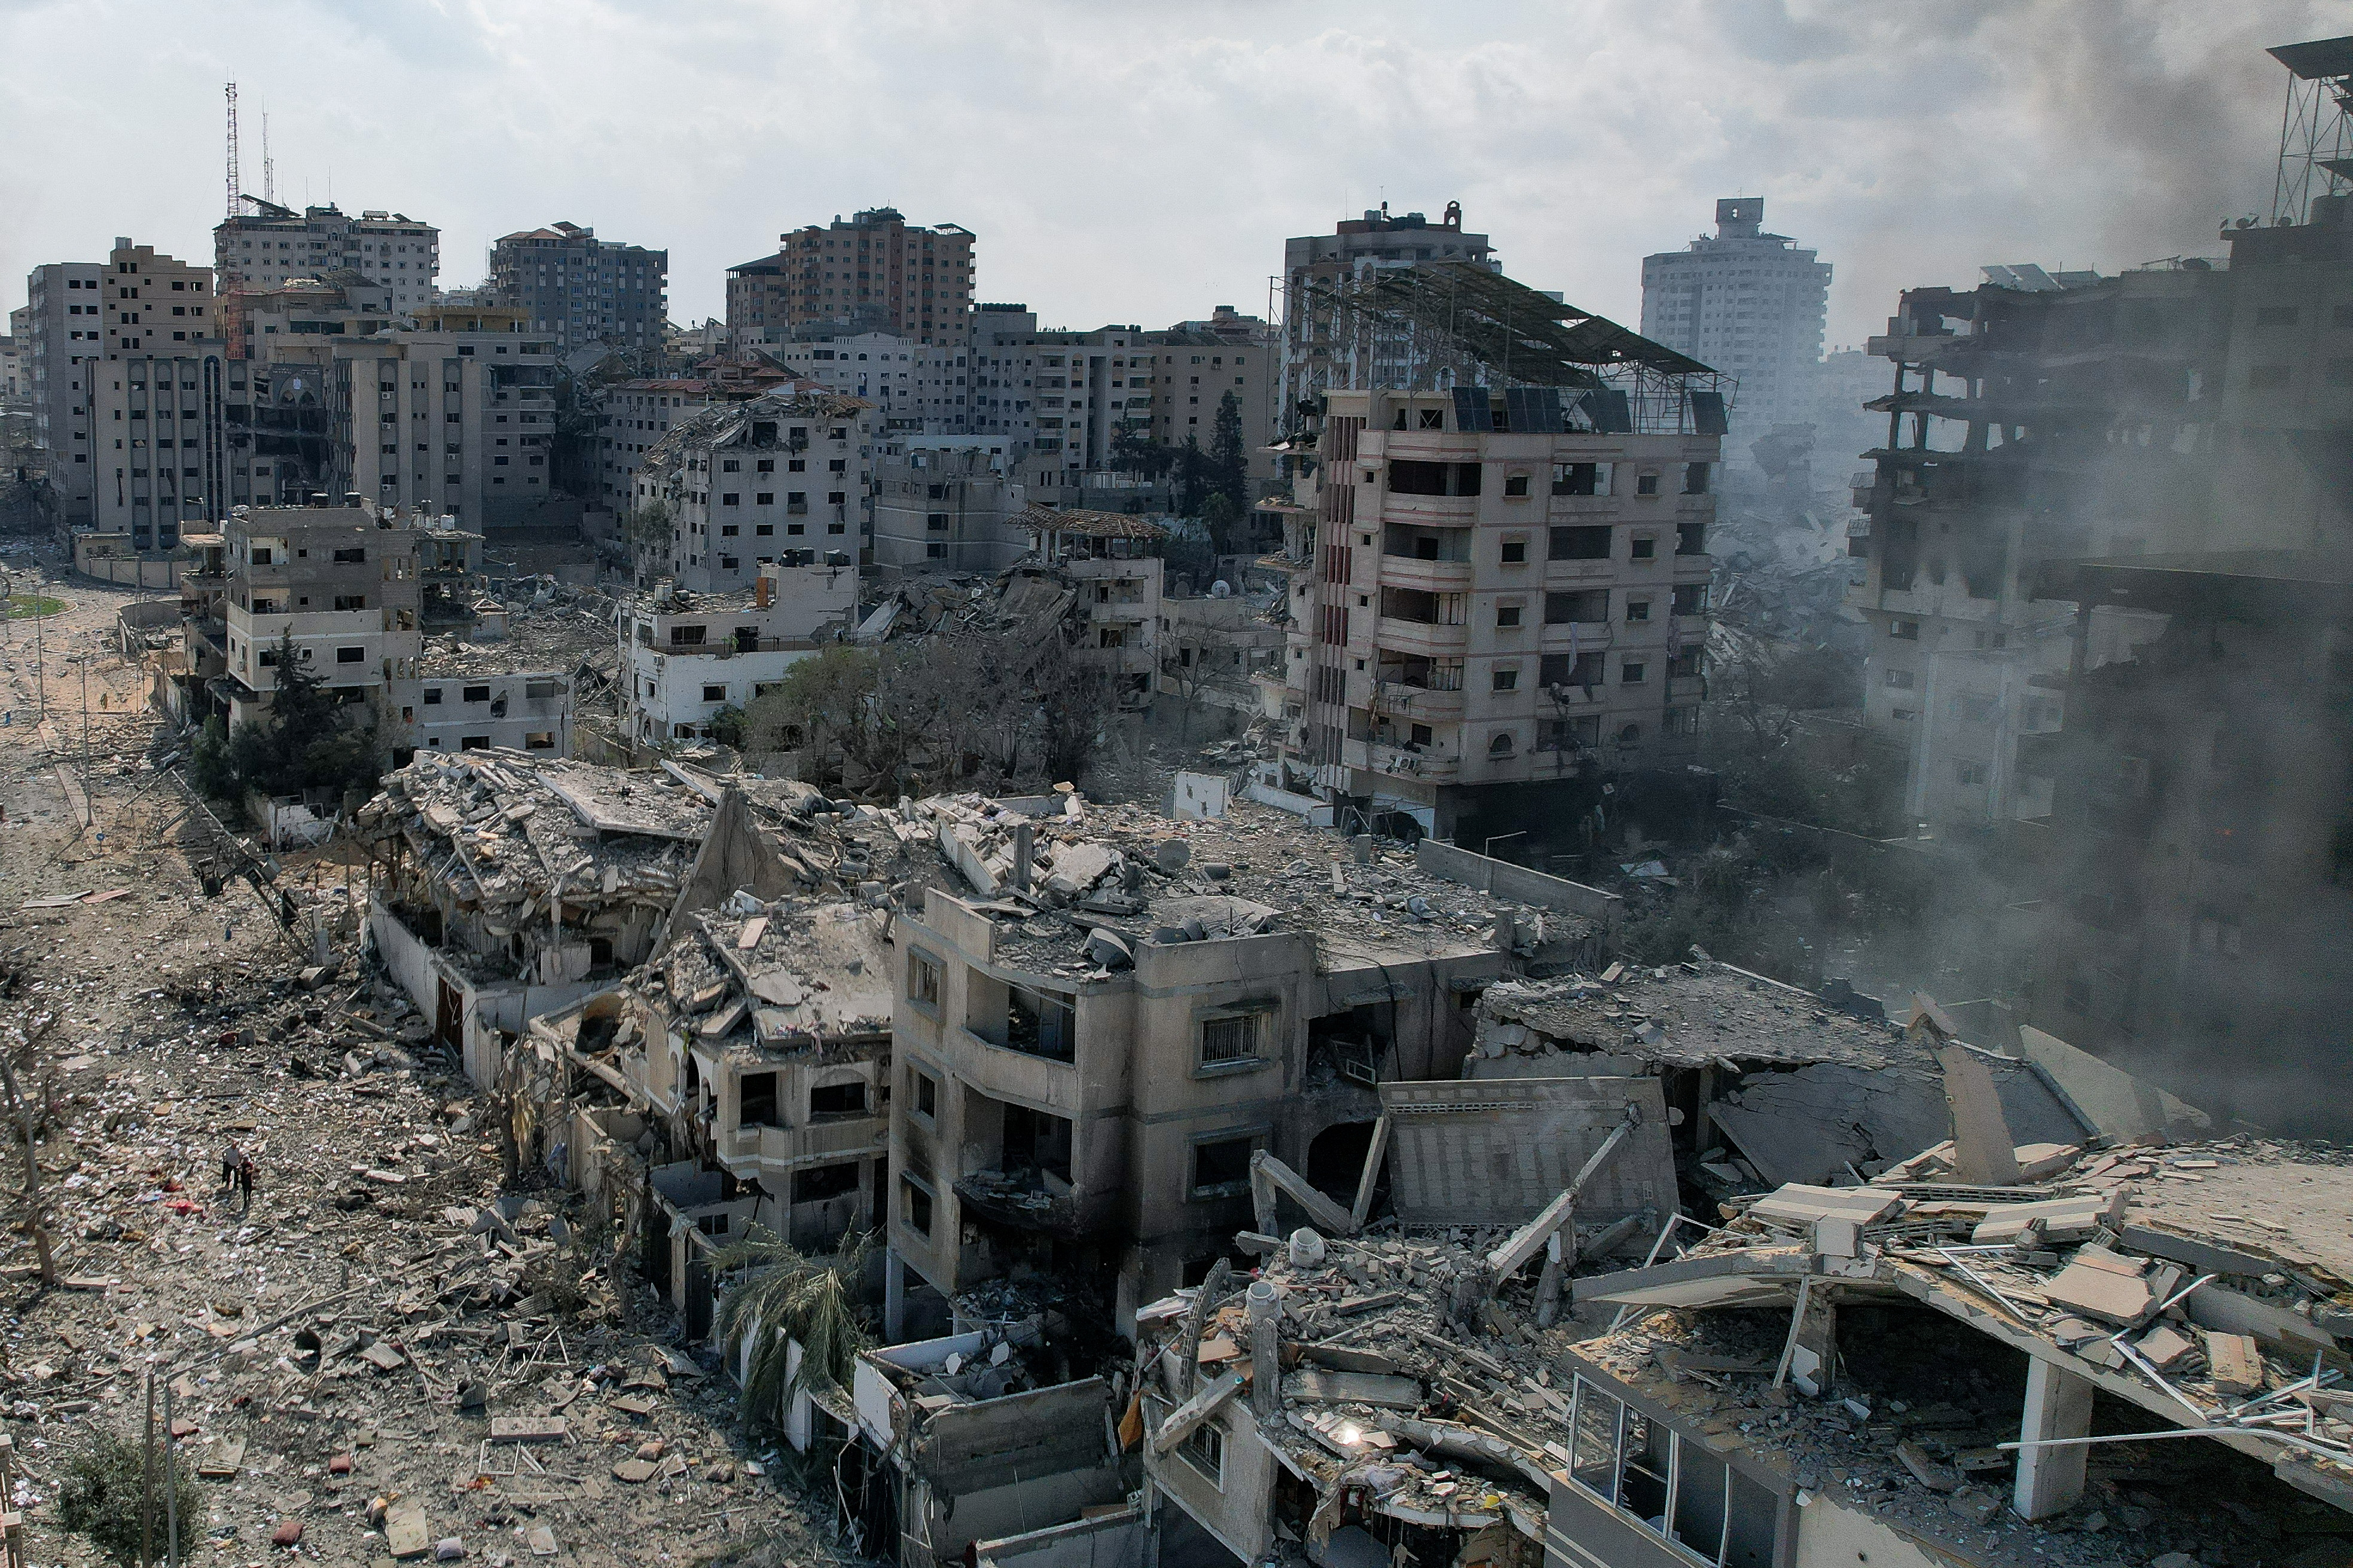 A view shows houses and buildings destroyed by Israeli strikes in Gaza City